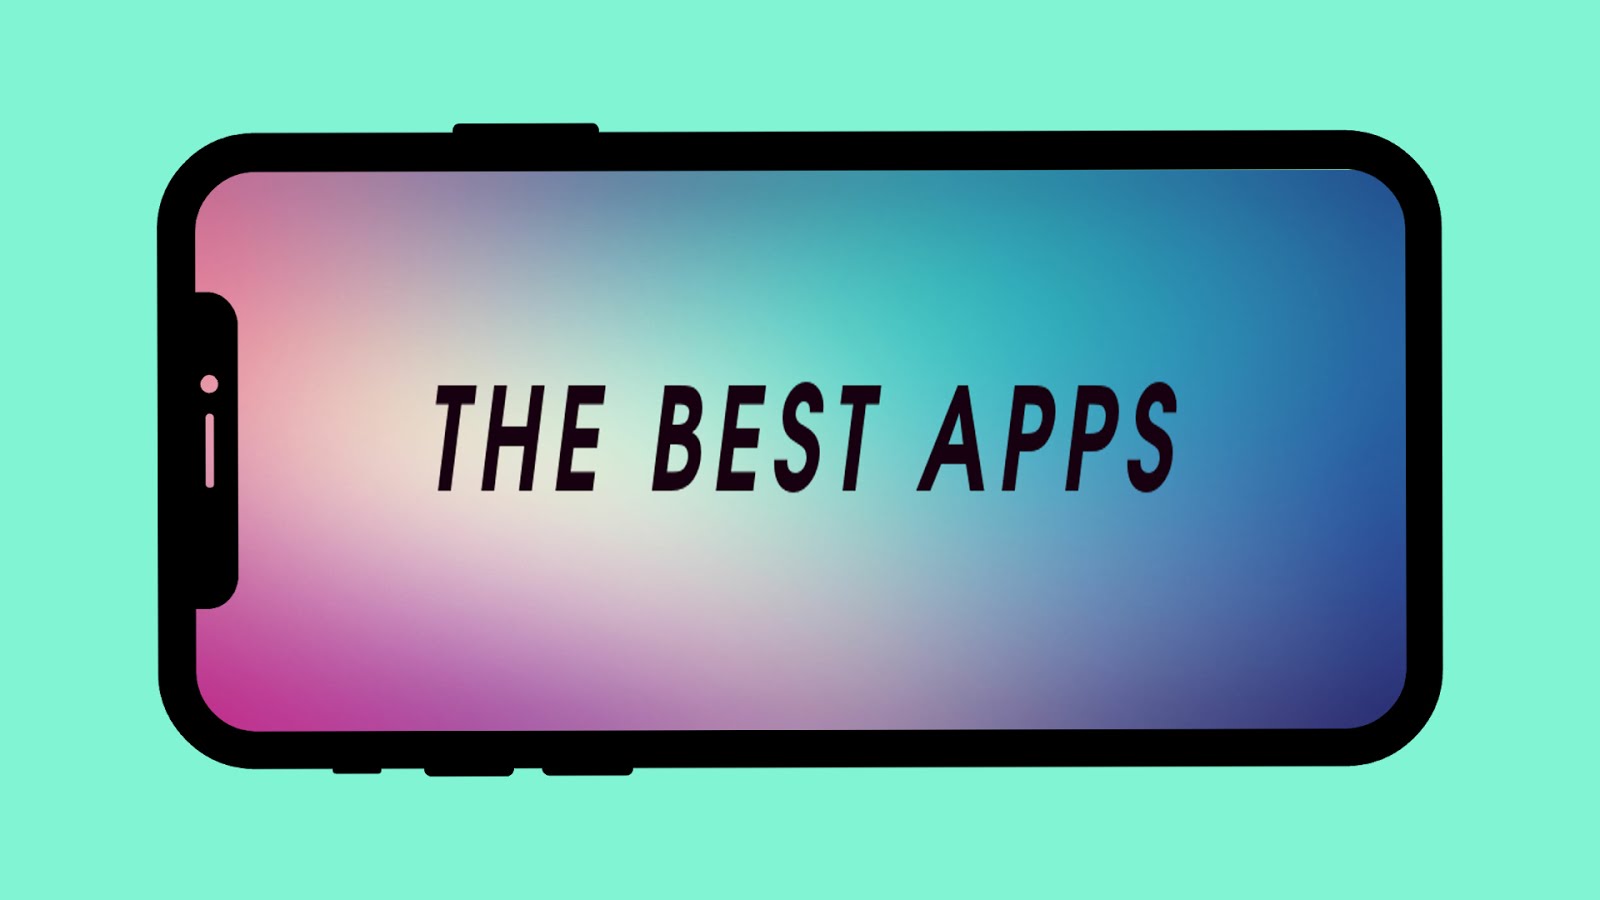 The best apps